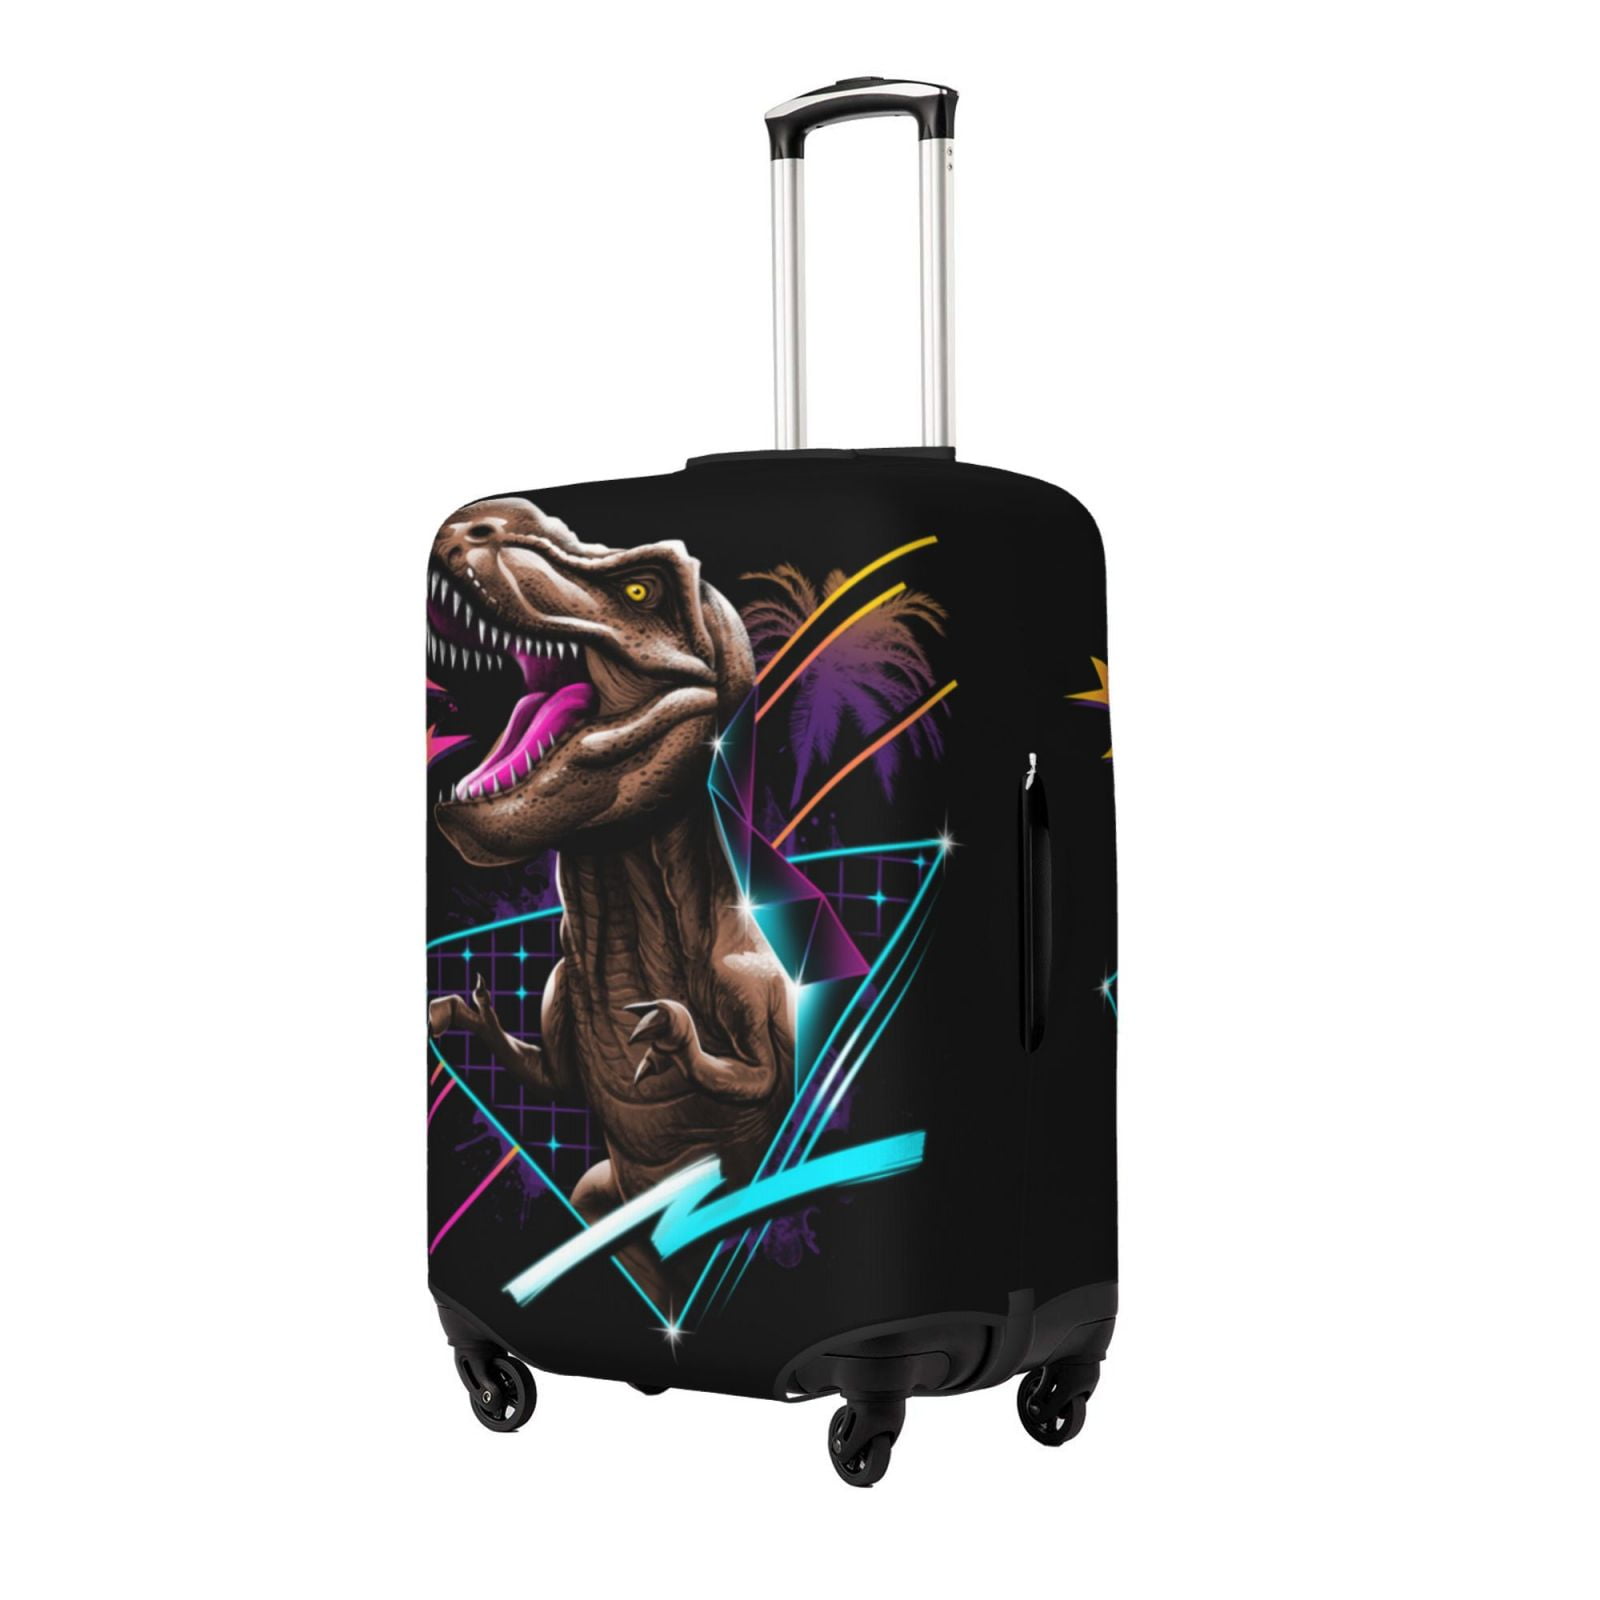 Hot ROBLOX 3D Digital Stretch Fabric Luggage Protective Cover Suit